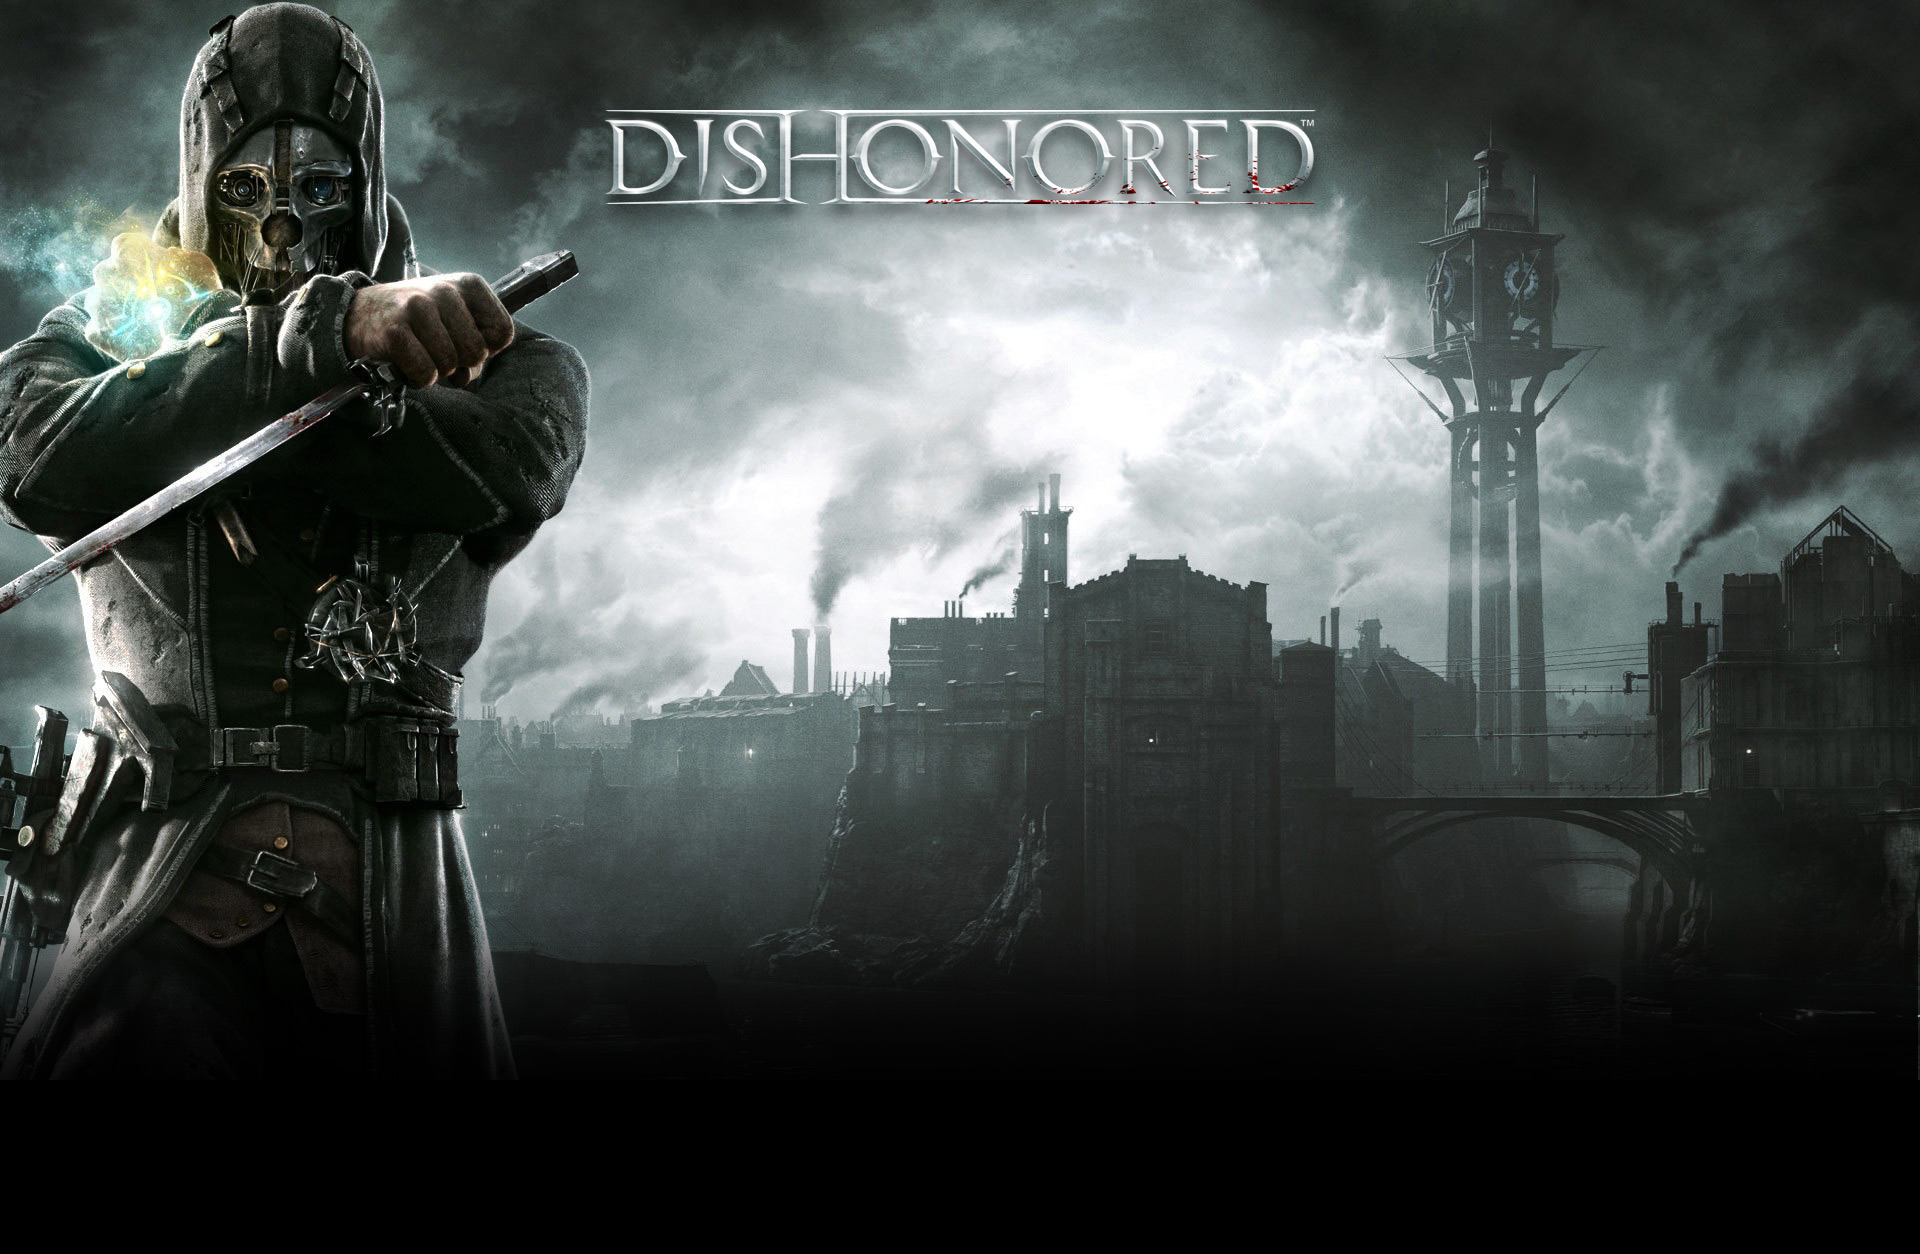 Dishonored: Void Walker's Arsenal (DLC 3)